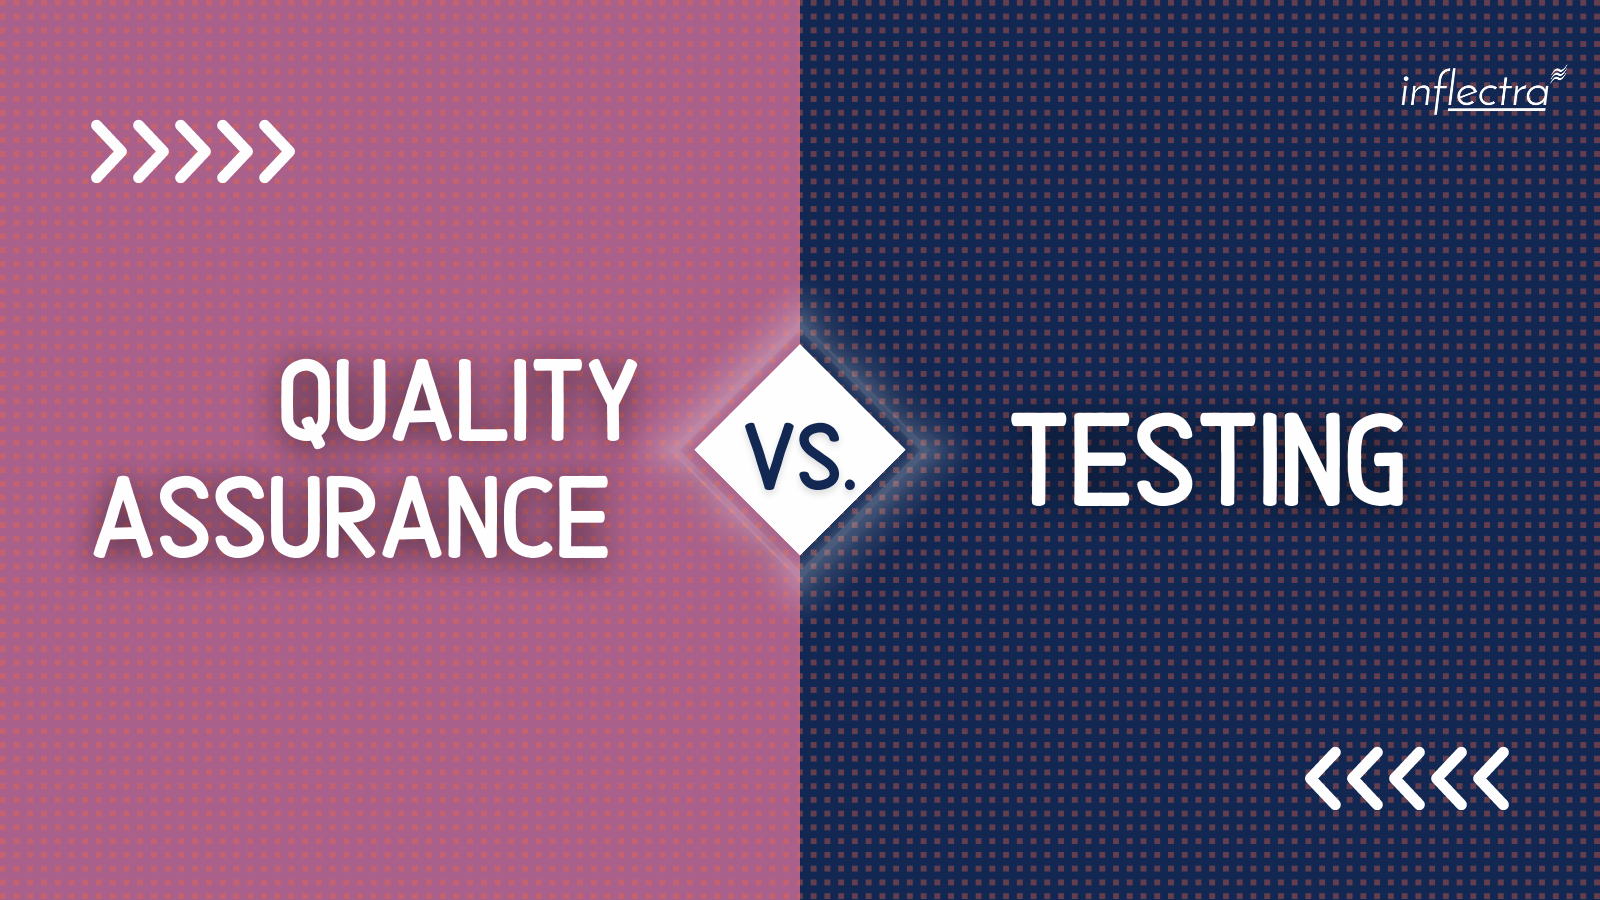 inflectra-quality-assurance-versus-testing-white-writing-image